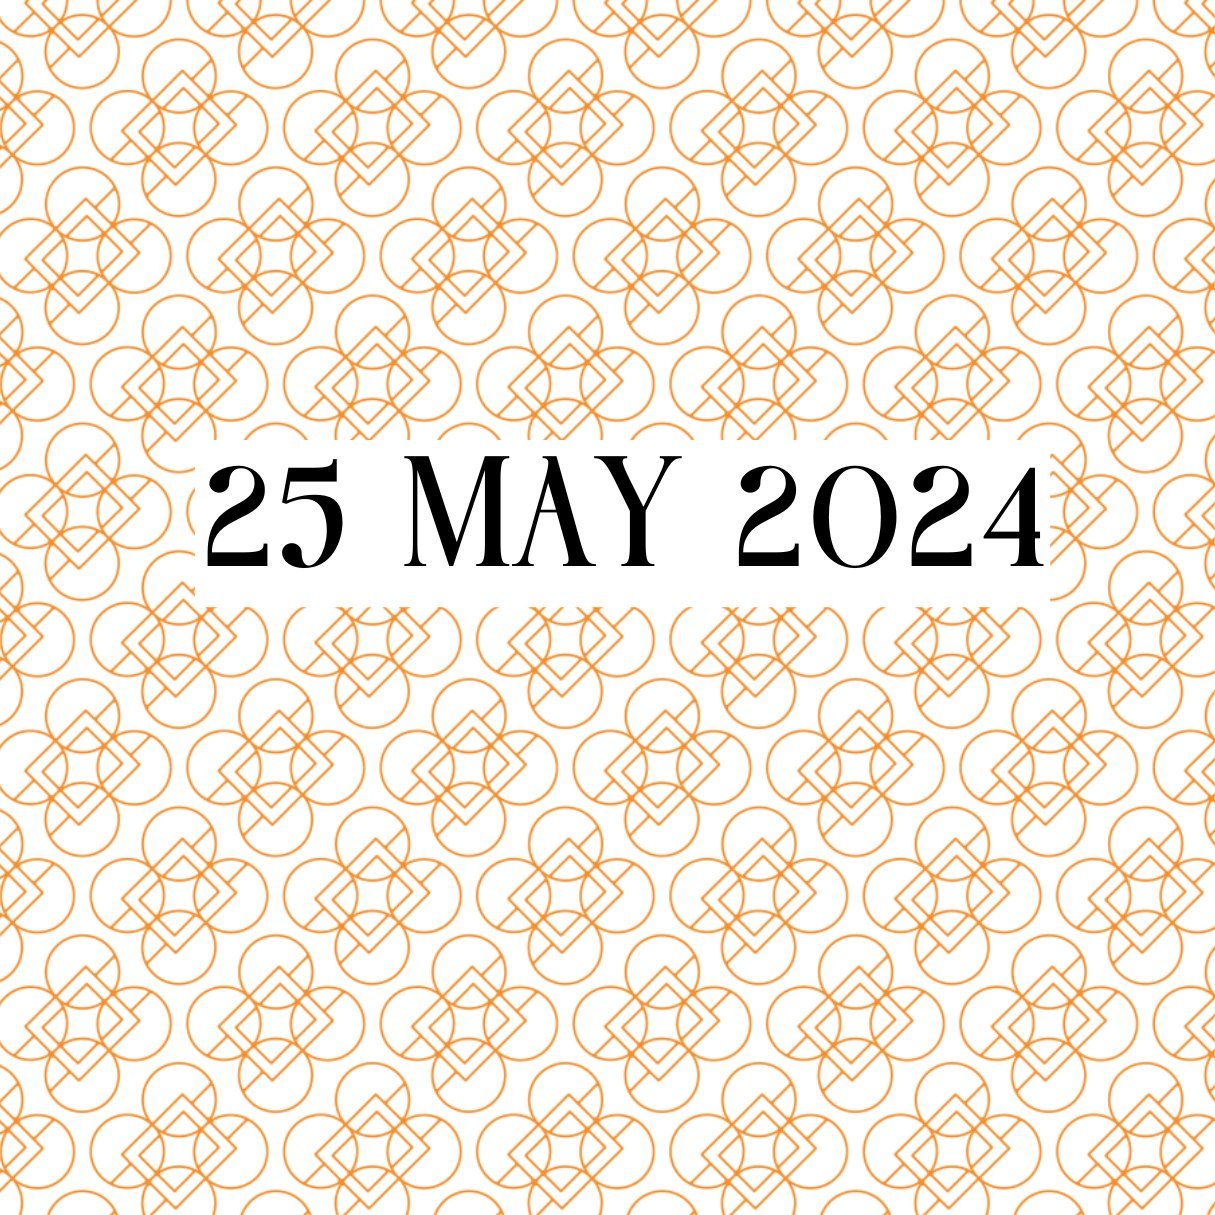 ✨✨✨✨ 25 MAY 2024 ✨✨✨✨I&rsquo;m so proud to announce that my first luxury weave range will be available to purchase Saturday 25 May 2024 via my website (link in bio)! The Marcella Collection, a tribute to my grandma, the late Marcella Lee. 

The Marce